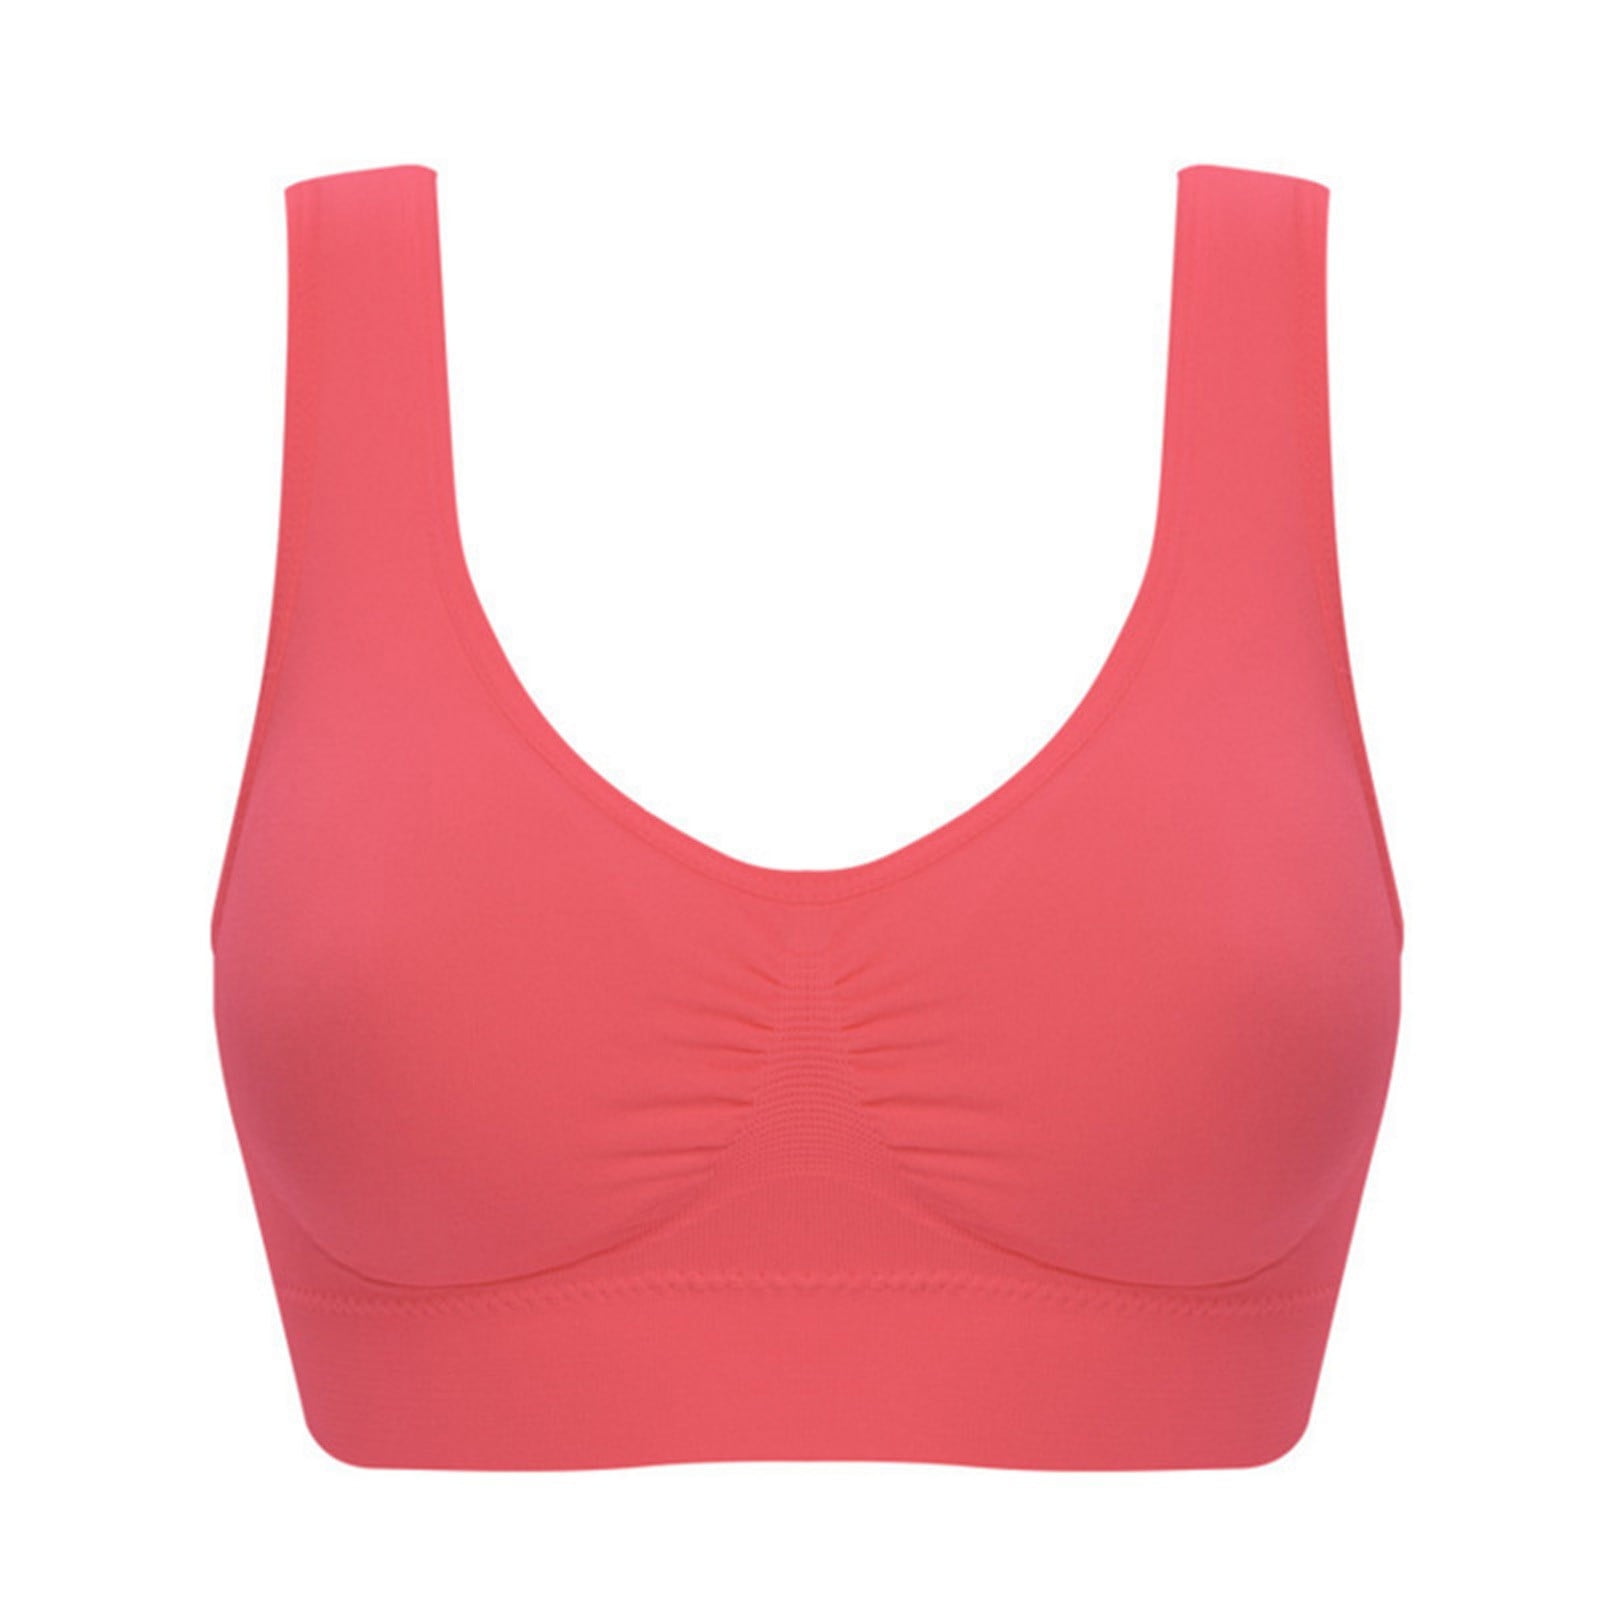 S LUKKC LUKKC Plus Size Wireless Sports Bras for Women Padded Wirefree  Full-Coverage Sleep Brassiere Medium Support Gym Workout Bralettes Pullover  Seamless Comfort Yoga Bra on Clearance! 